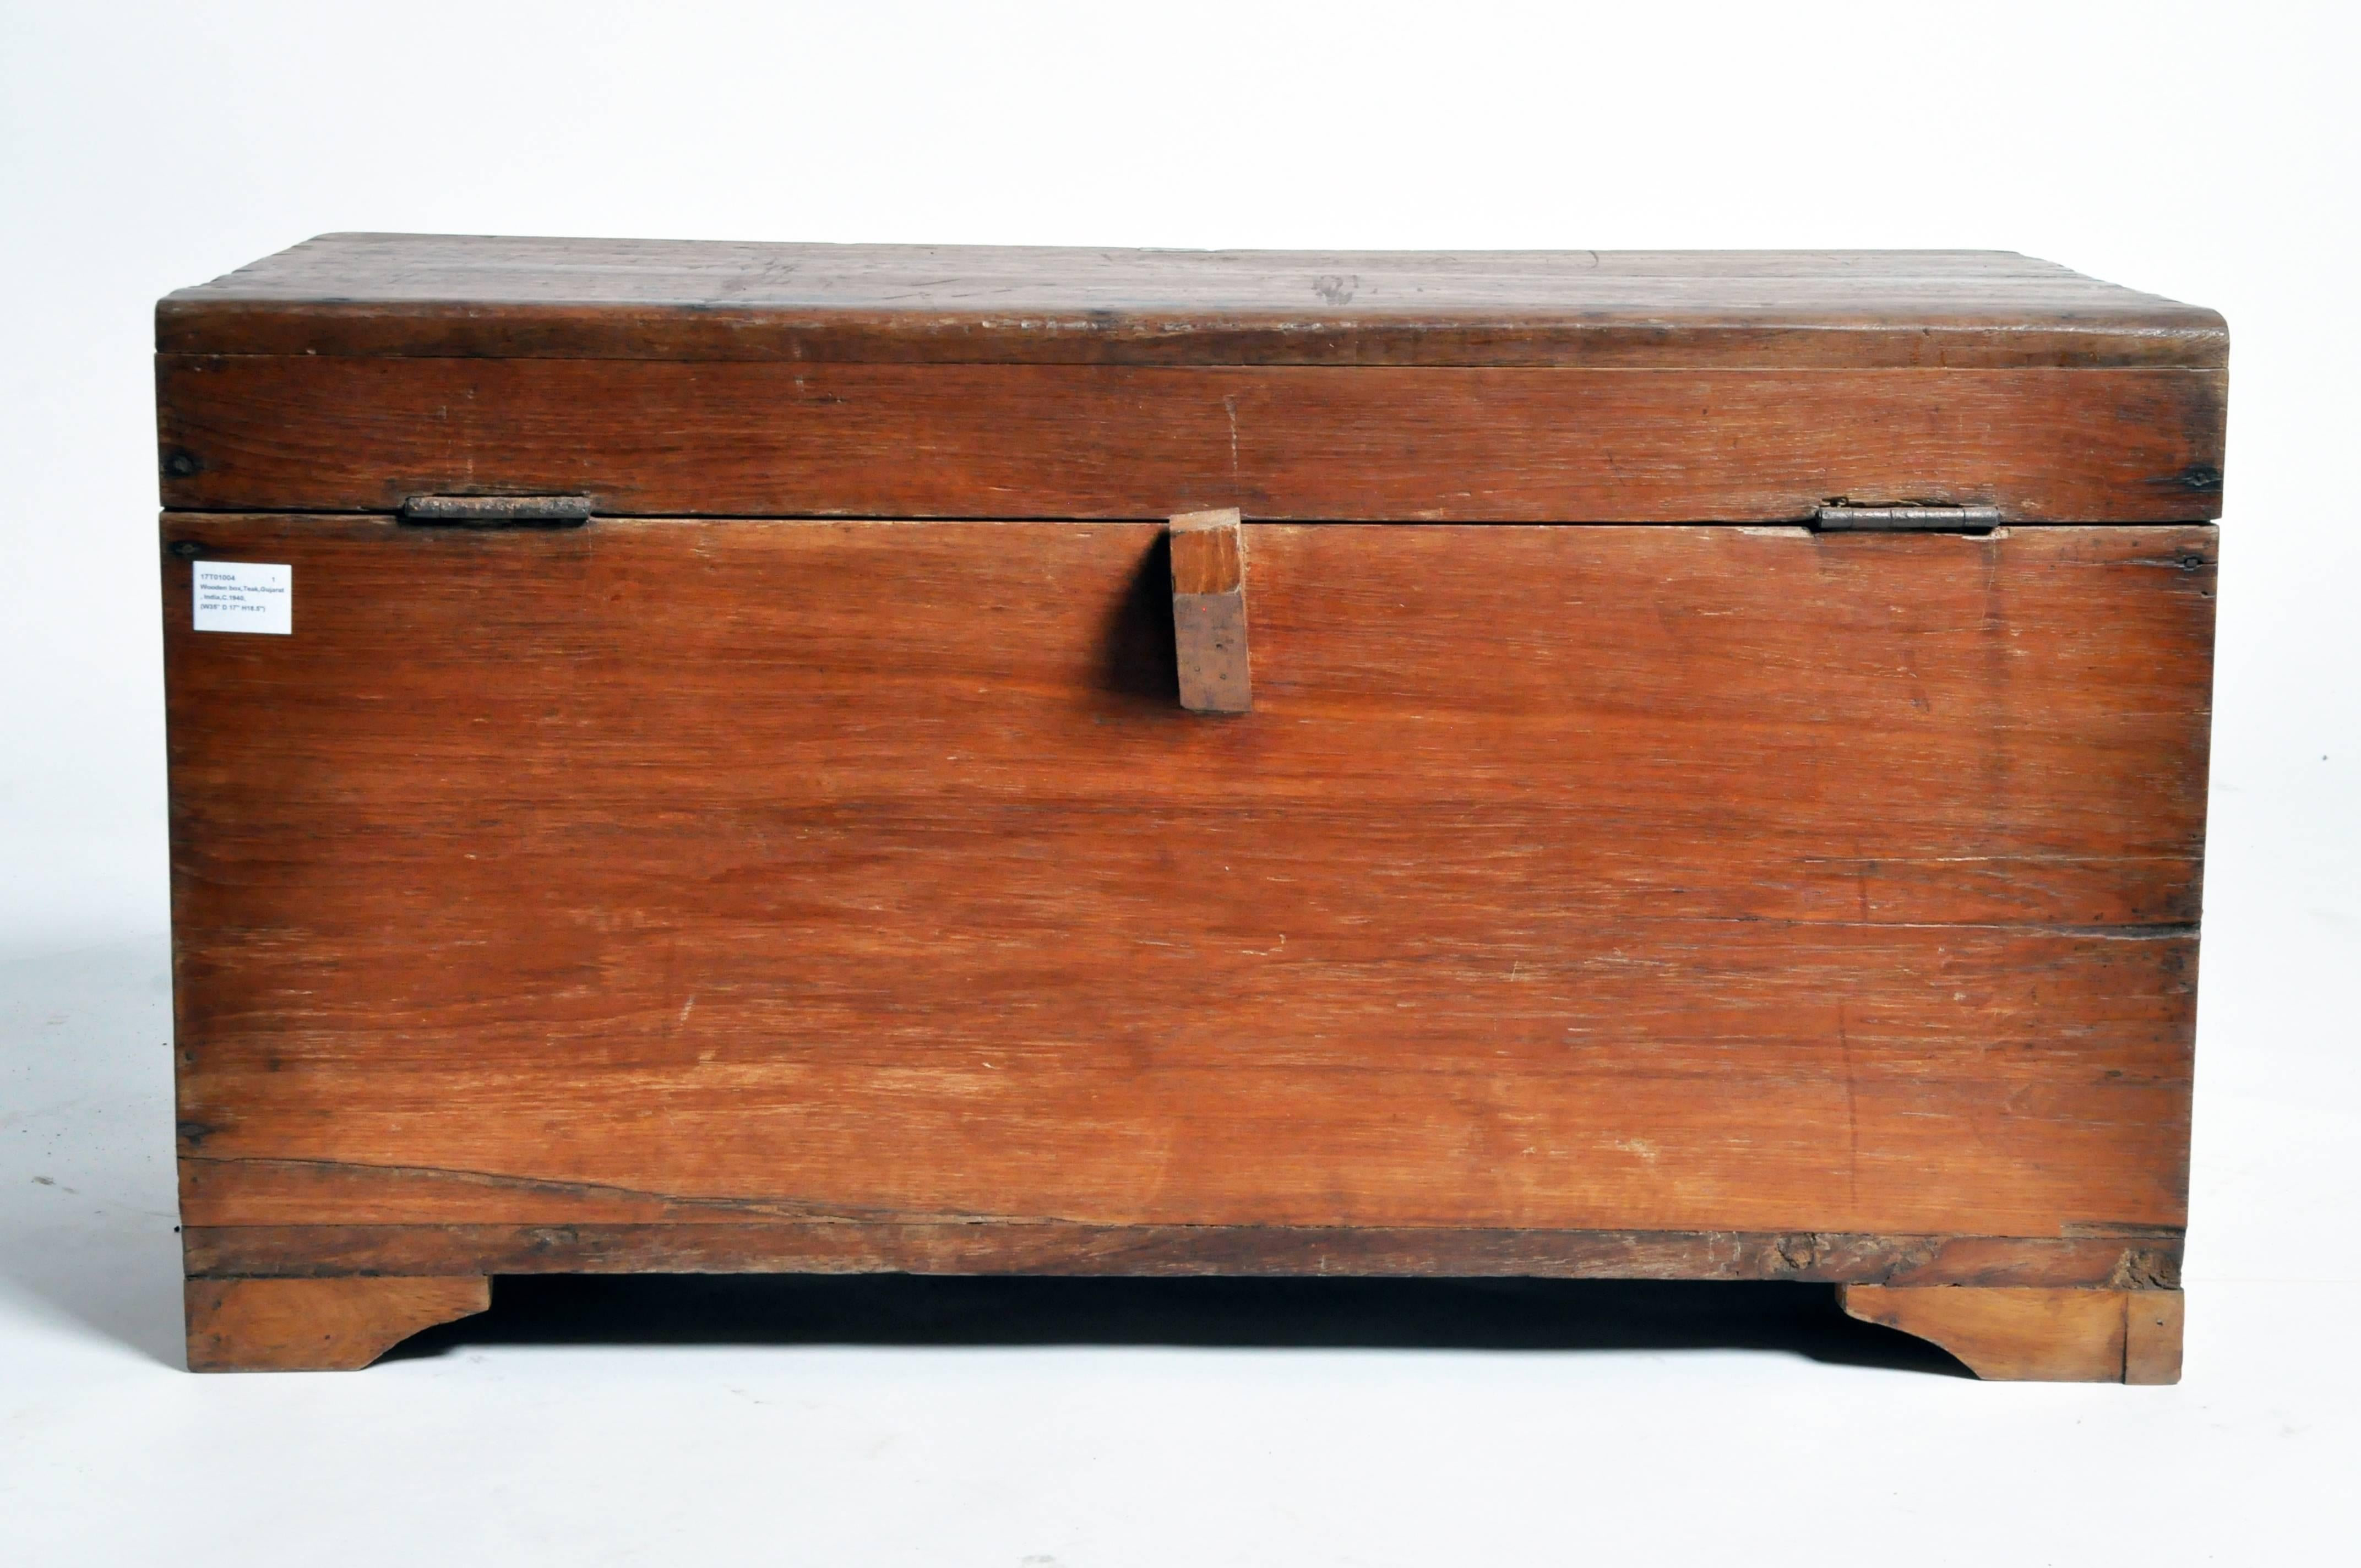 Indian Wooden Storage Box with Metal Trim